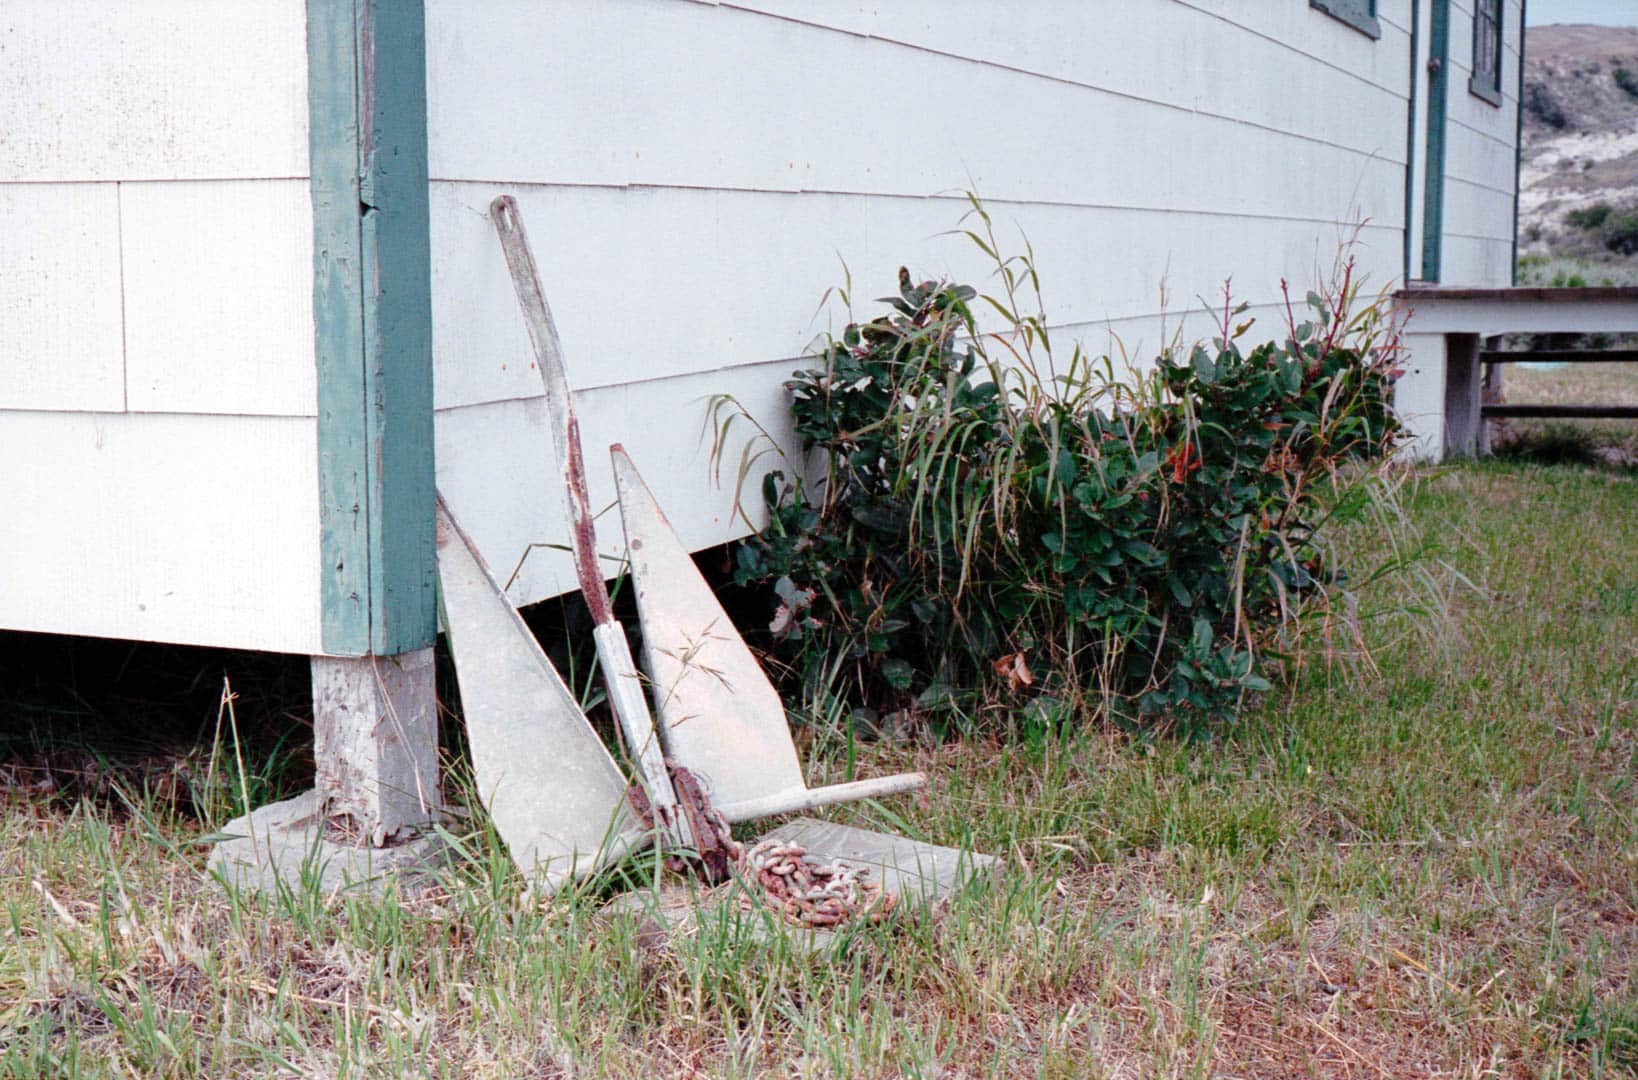 A boat anchor leaning against a wooden building